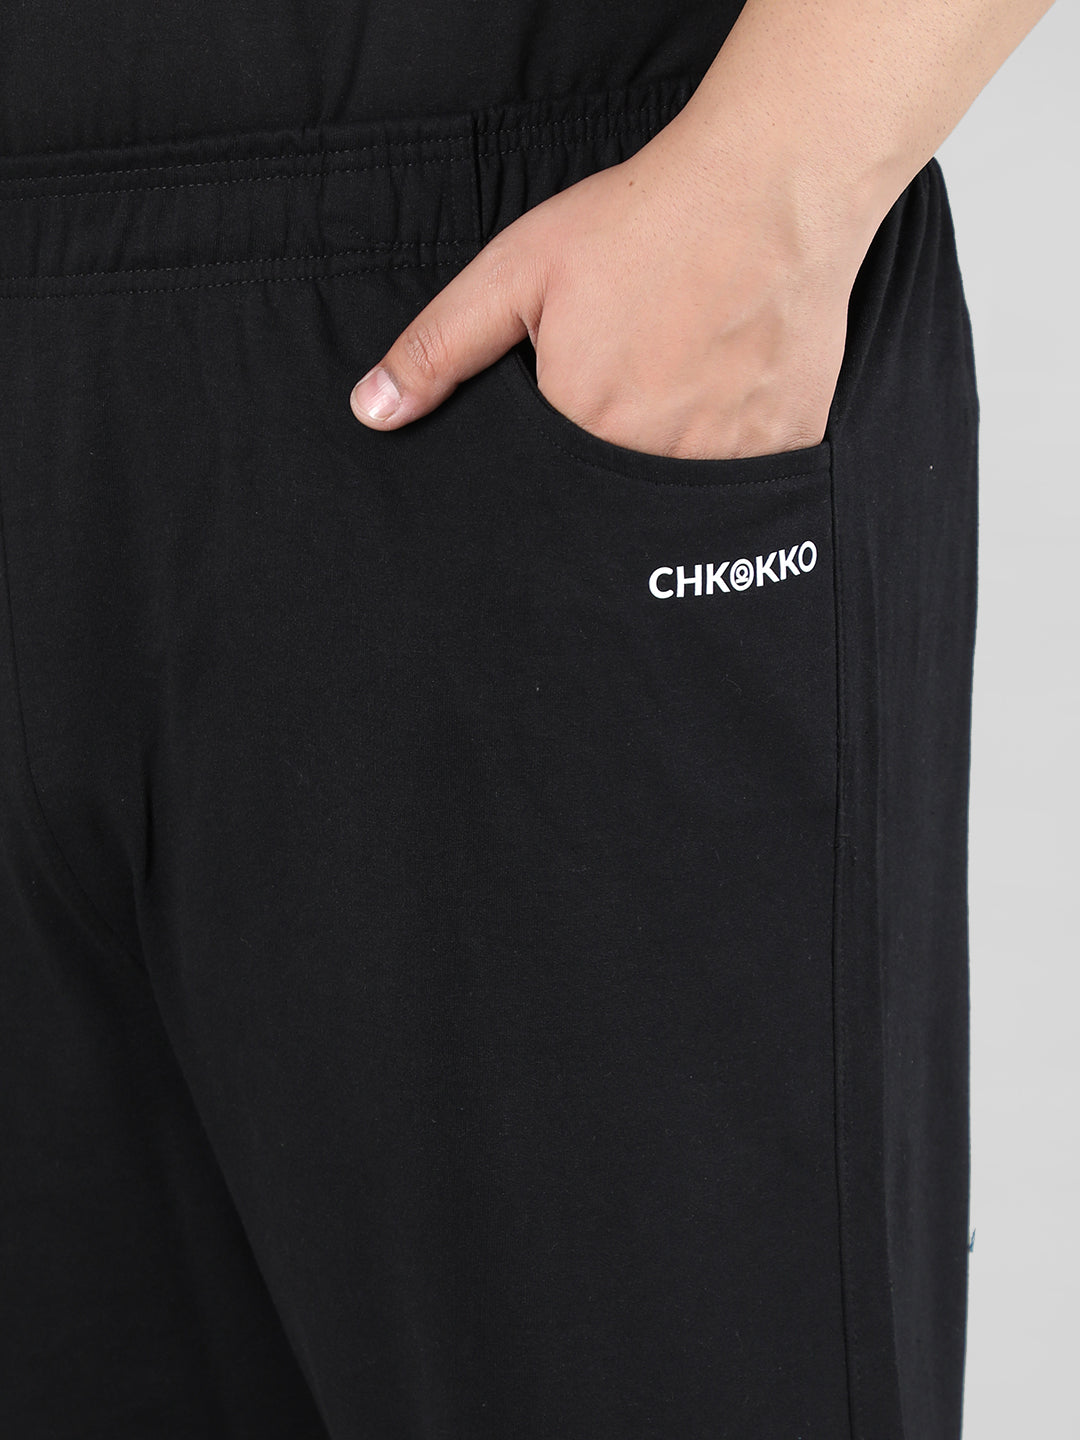 Men Black Plus Size Trackpant With Pockets